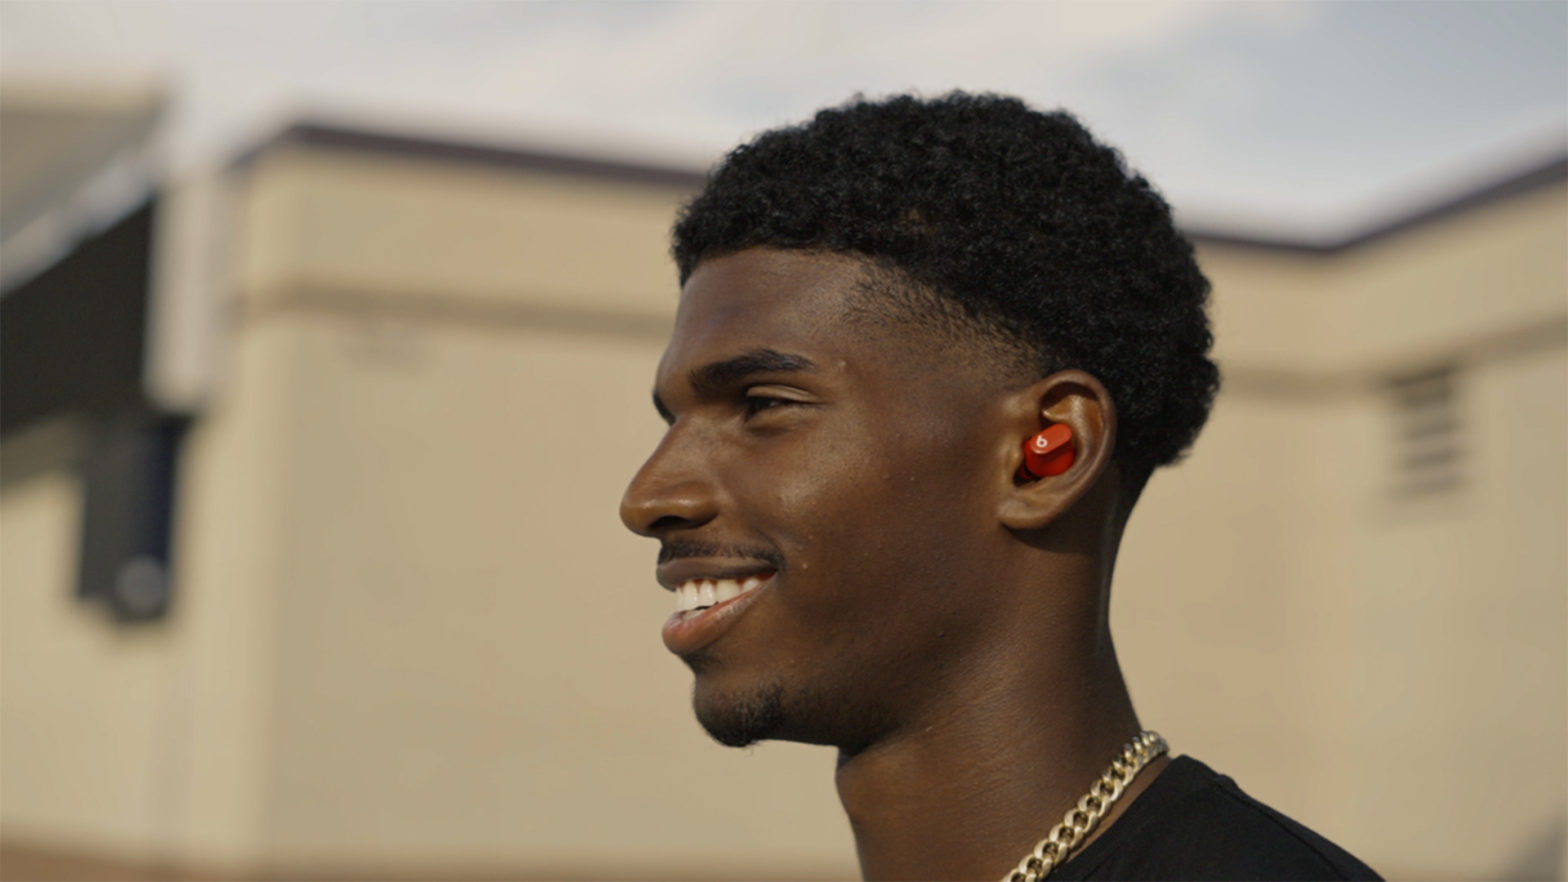 Deion Sanders' Son Shedeur Sanders Is Now The Youngest Athlete Ambassador For Beats By Dre